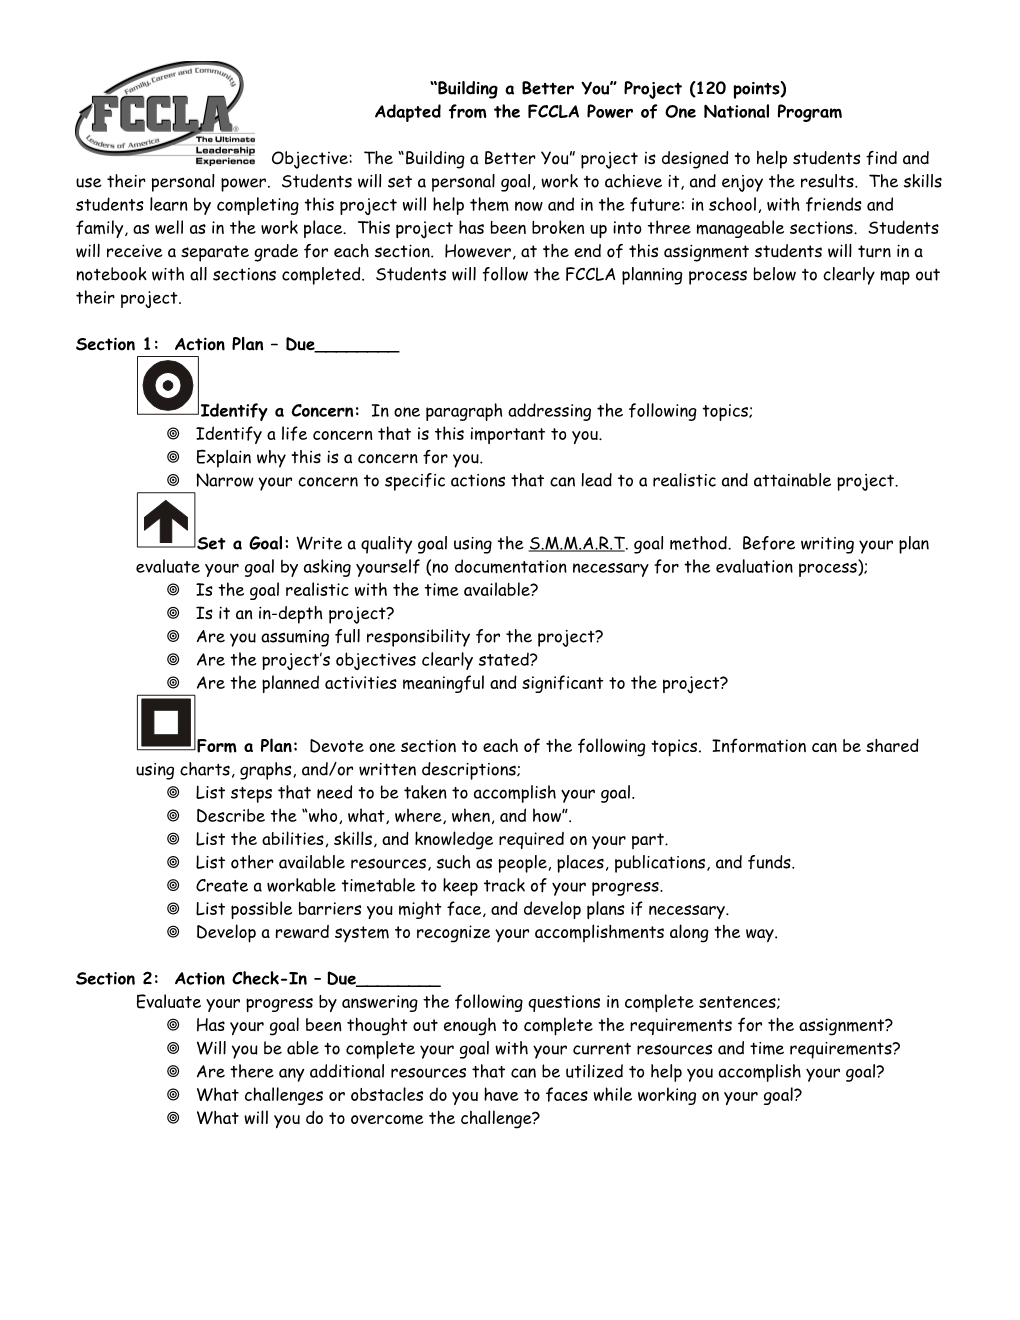 Building a Better You Project (80 Points) Adapted from the FCCLA Power of One National Program